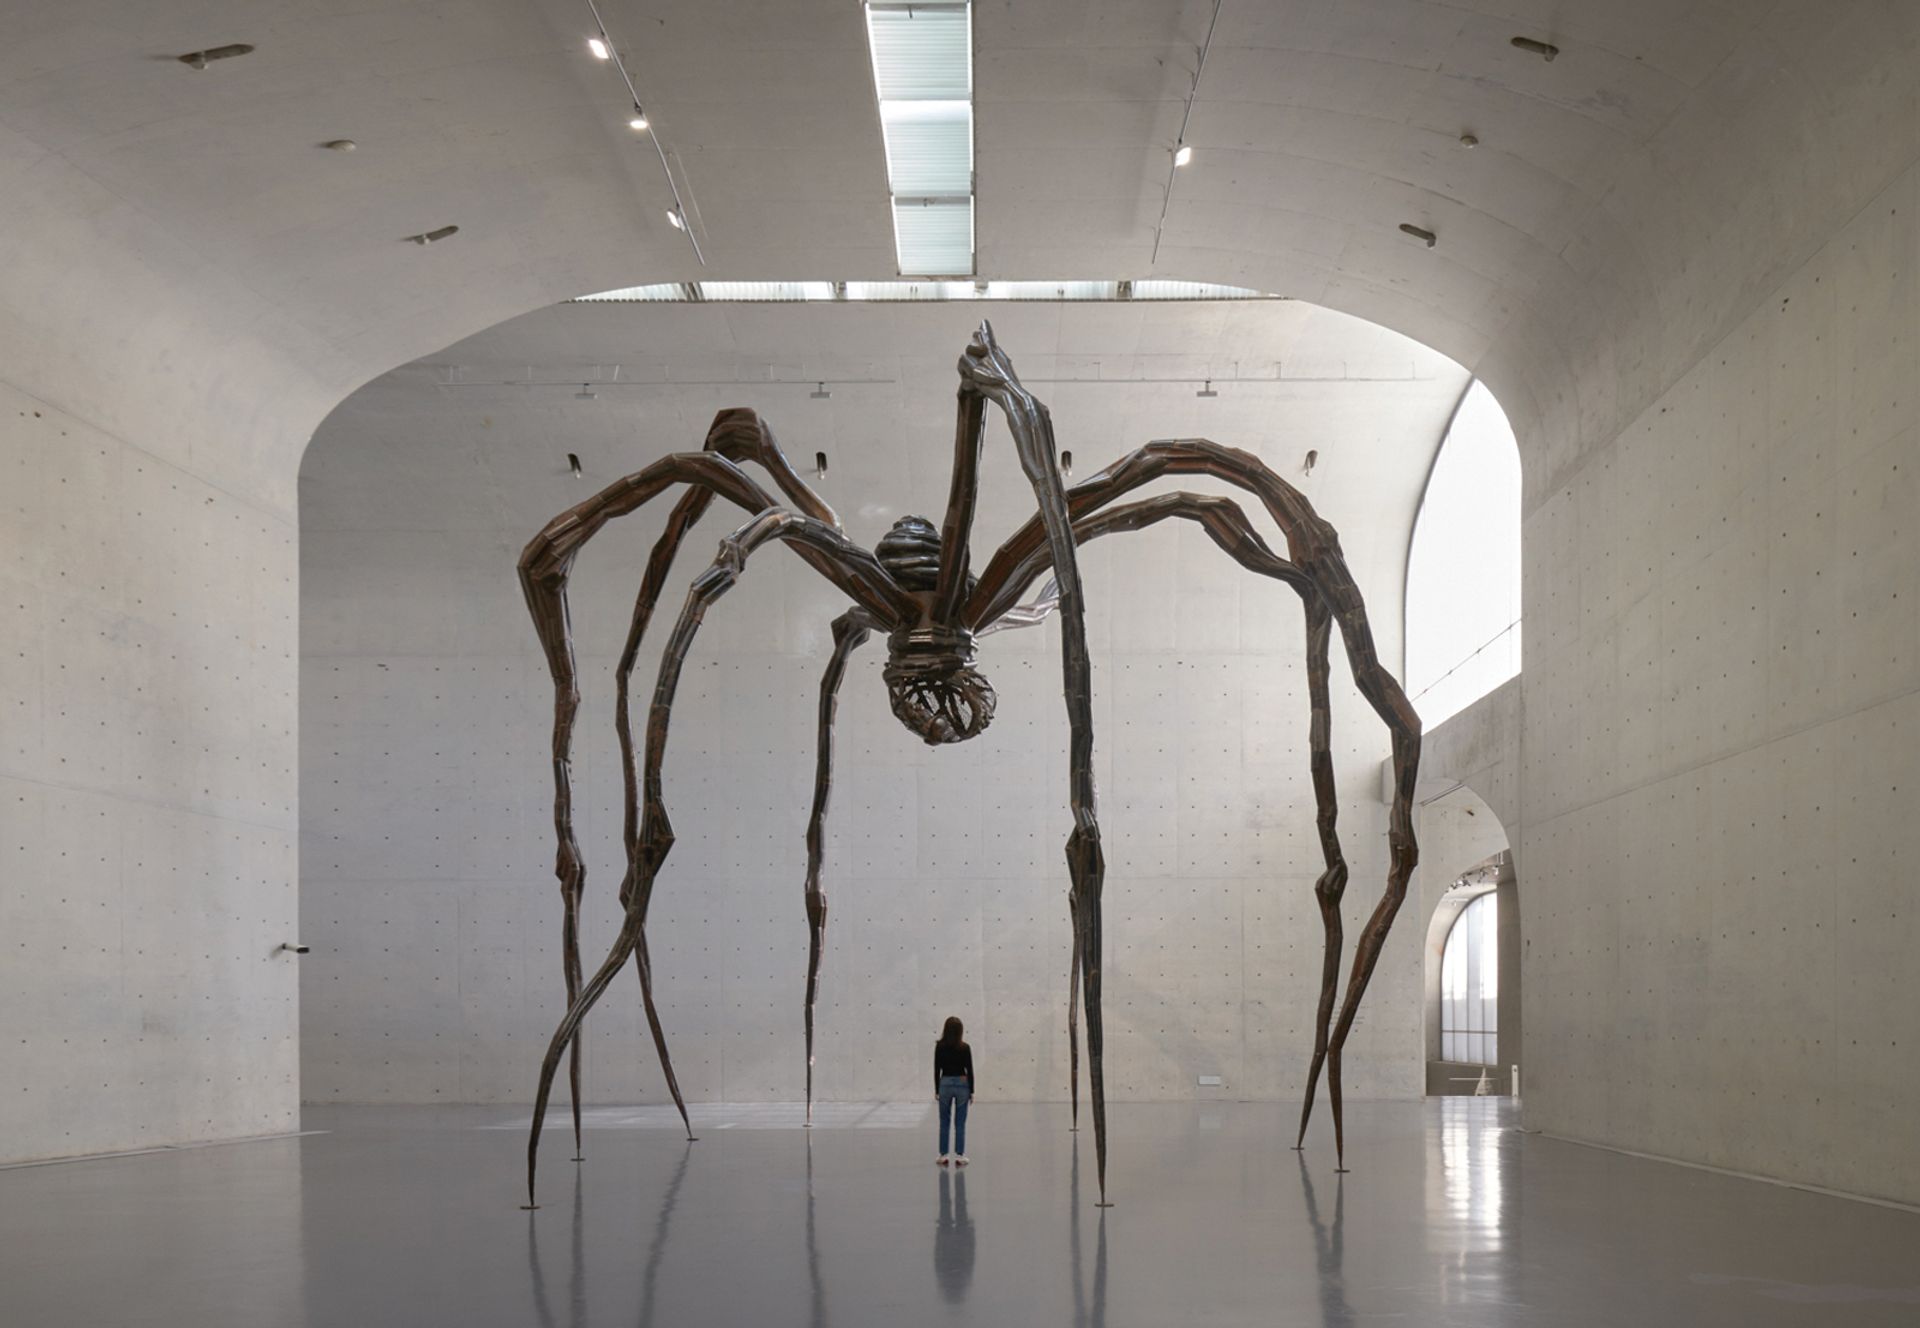 Louise Bourgeois's Maman (1999) at the Long Museum in Shanghai © The Easton Foundation/VAGA (ARS), NY. Photo: Jiaxi & zhe. Long Museum